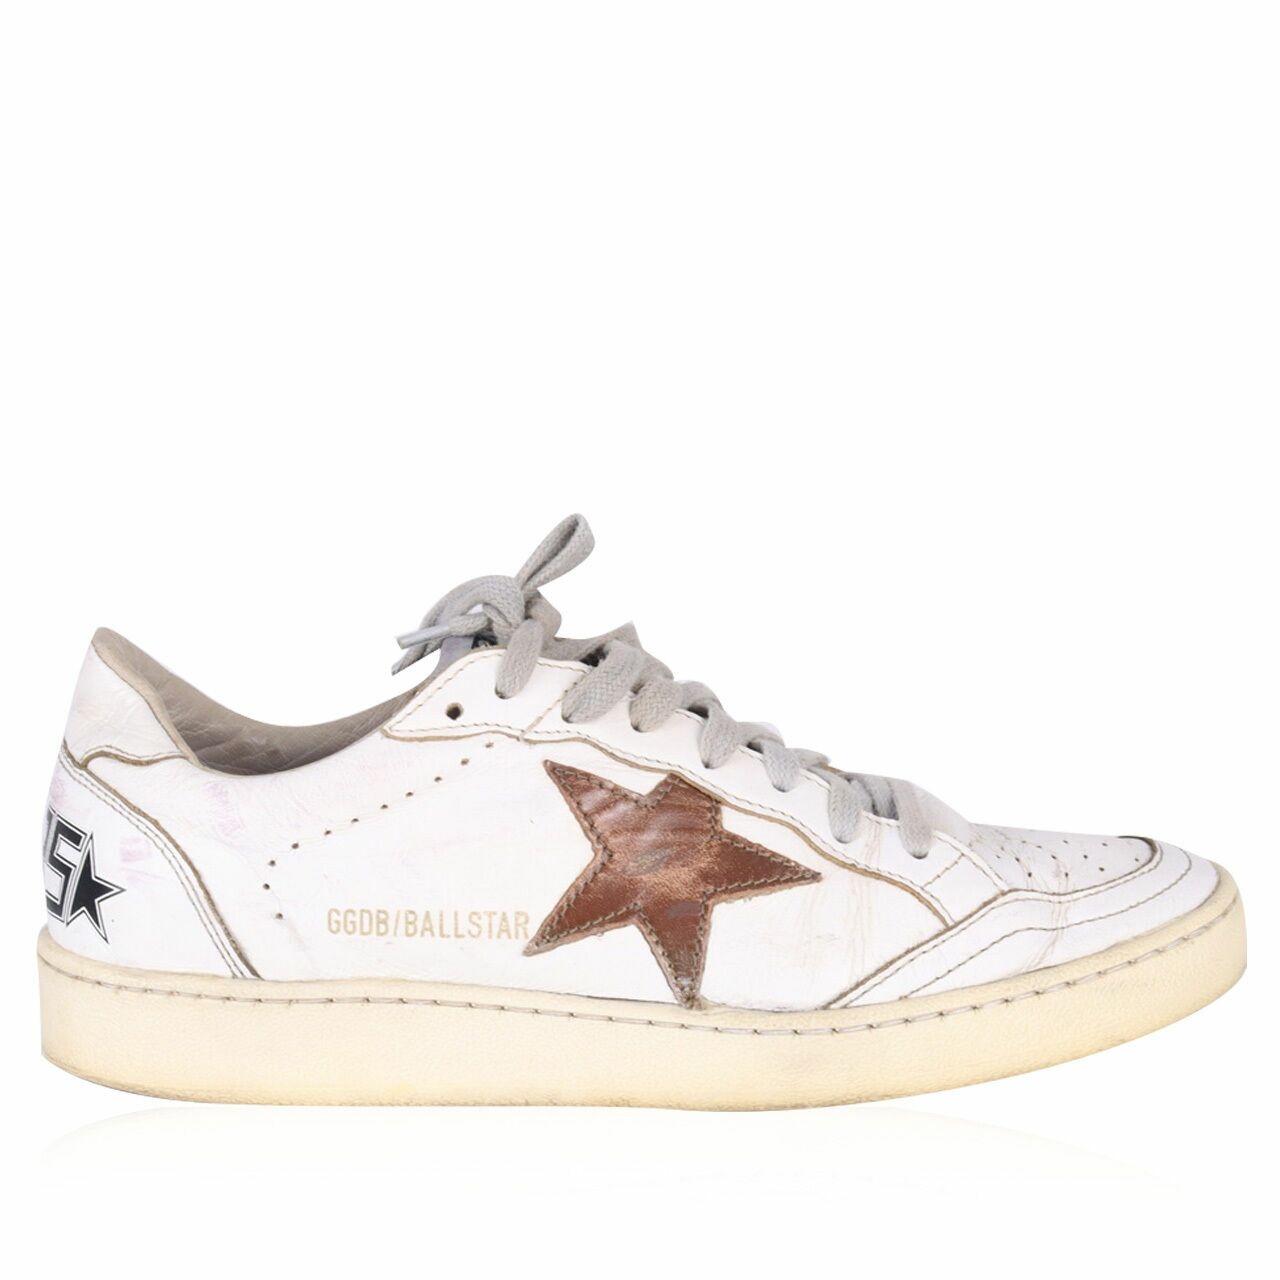 Golden Goose Ball Star Leathet Trainers White Sneakers